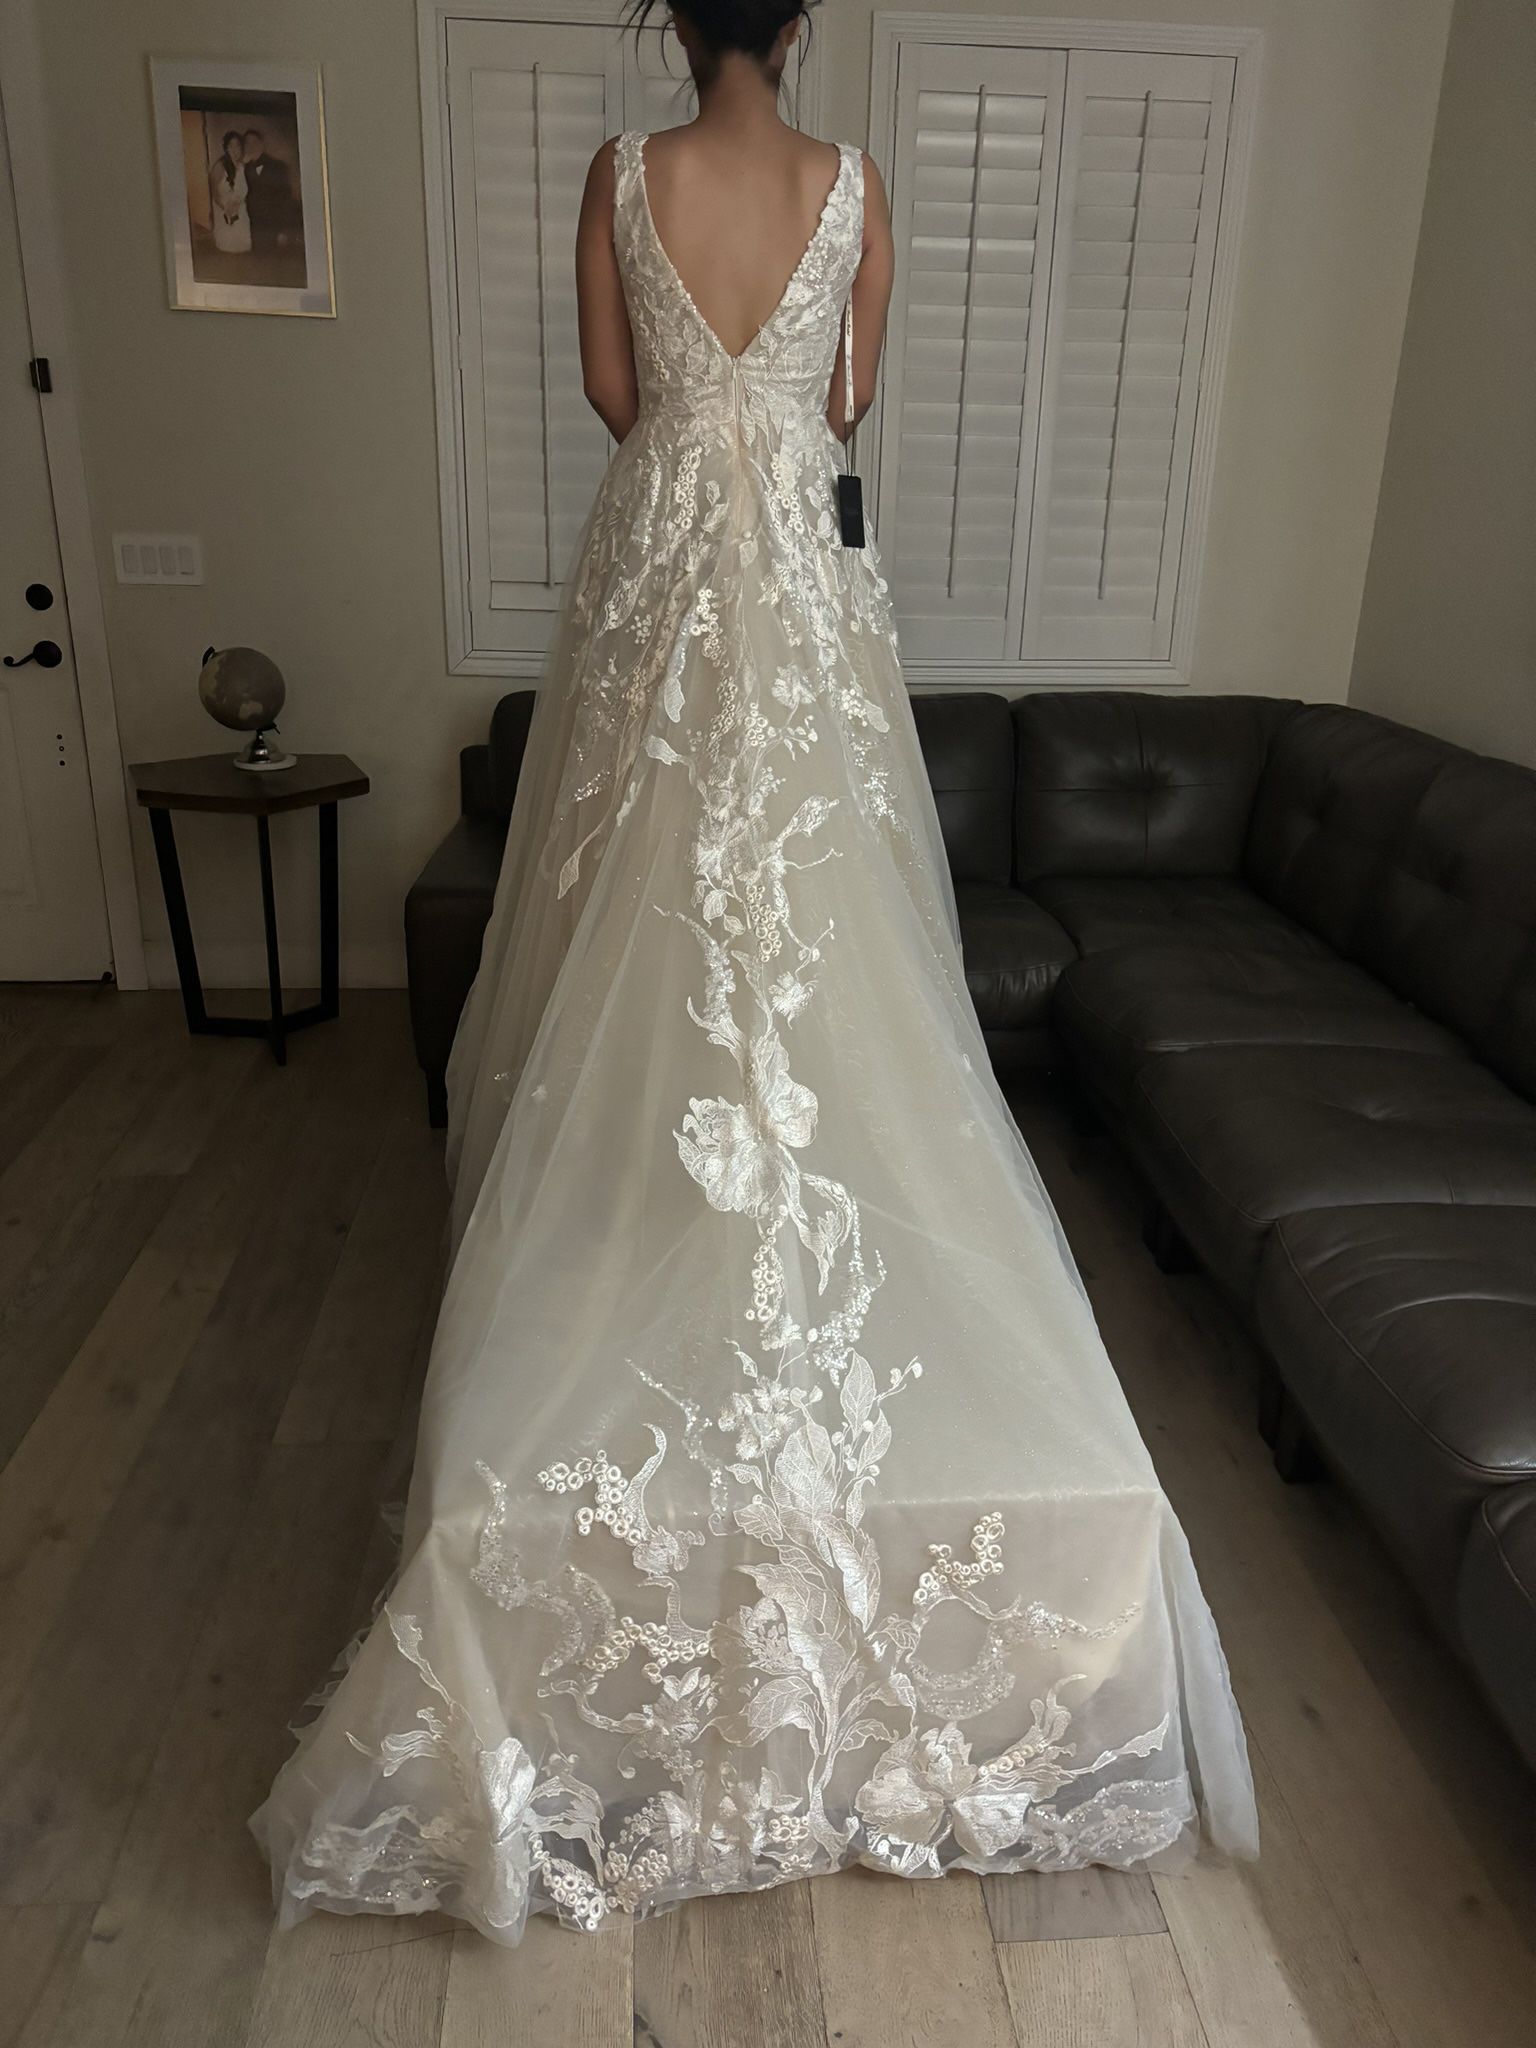 Never Used Gorgeous Champagne Wedding Dress 